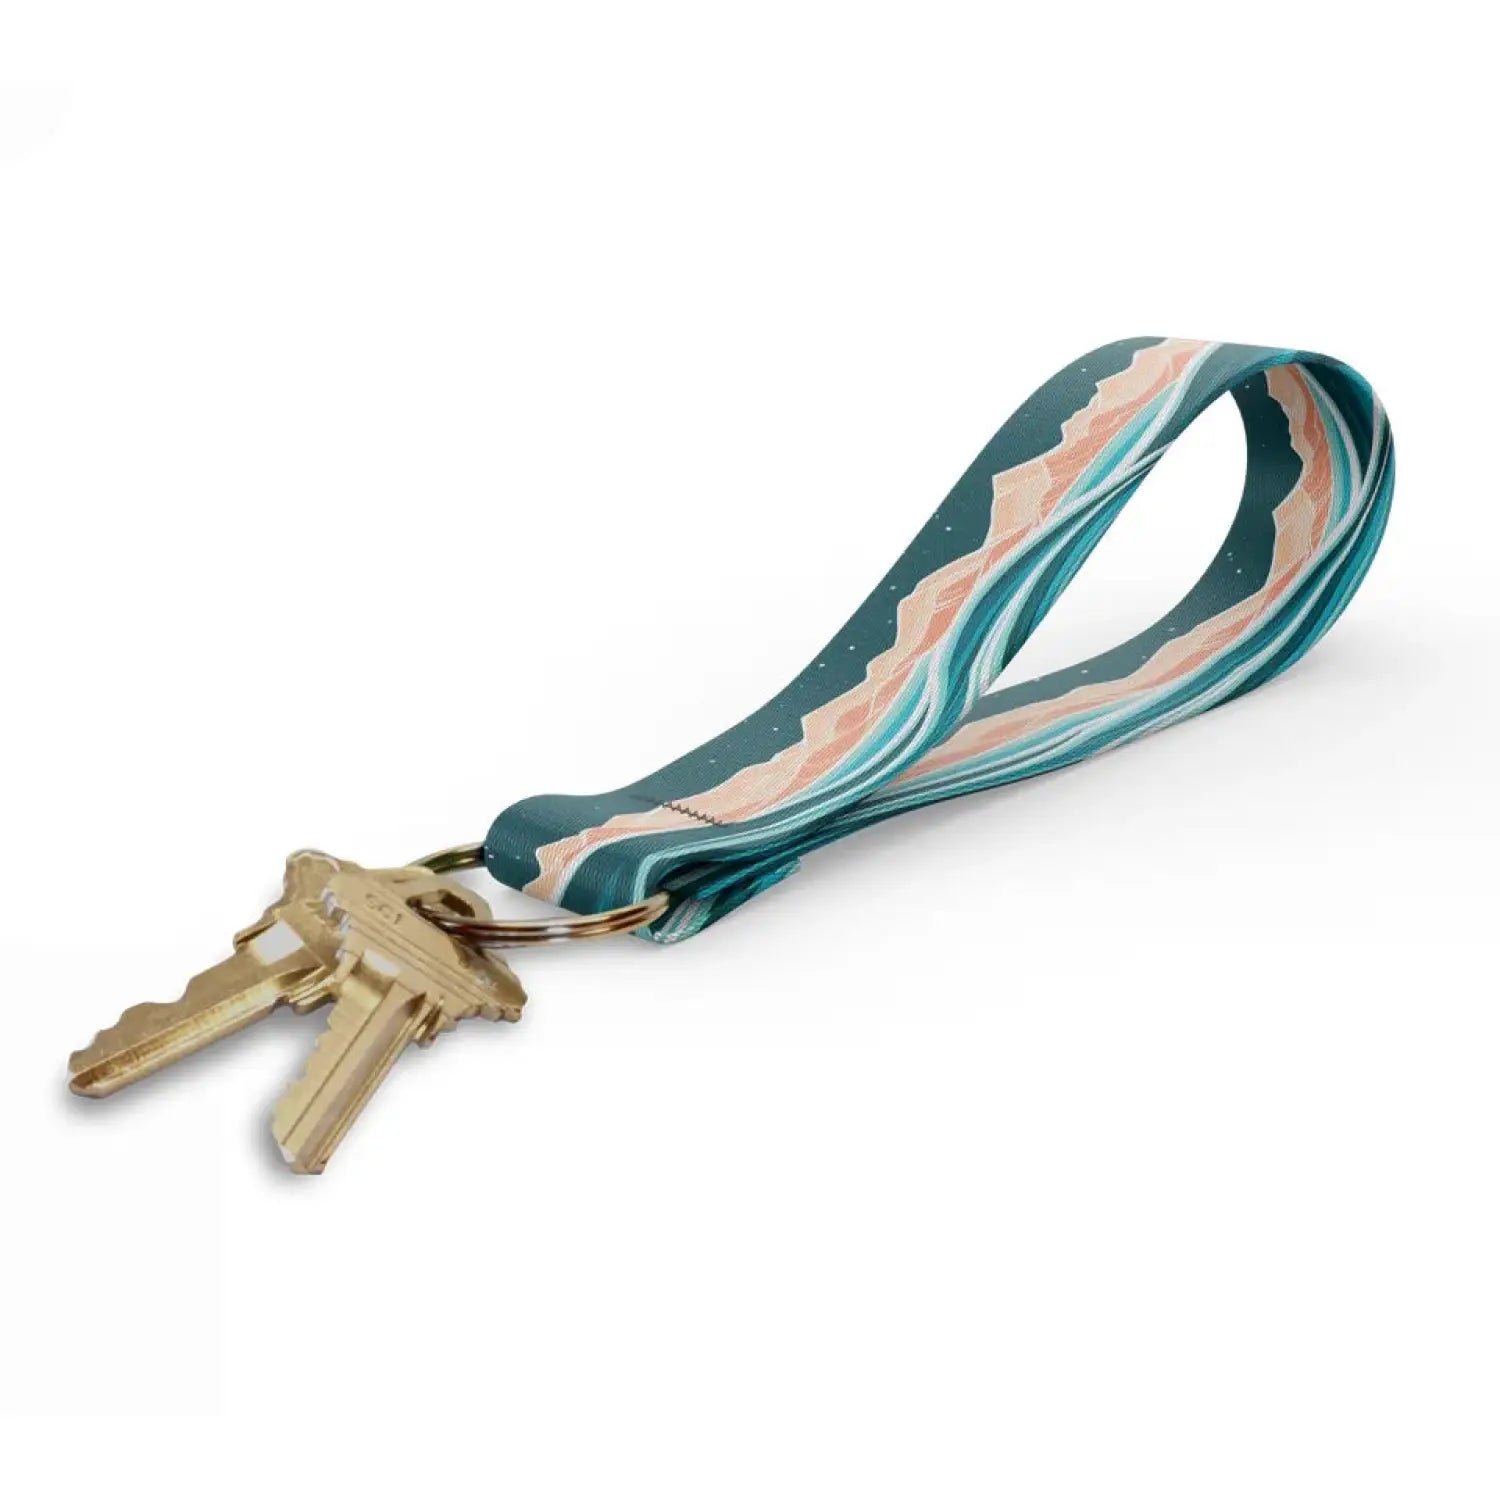 Wingo Key Fob in Rolling Seas design. Blue cream and coral colors shown with metal ring and keys.